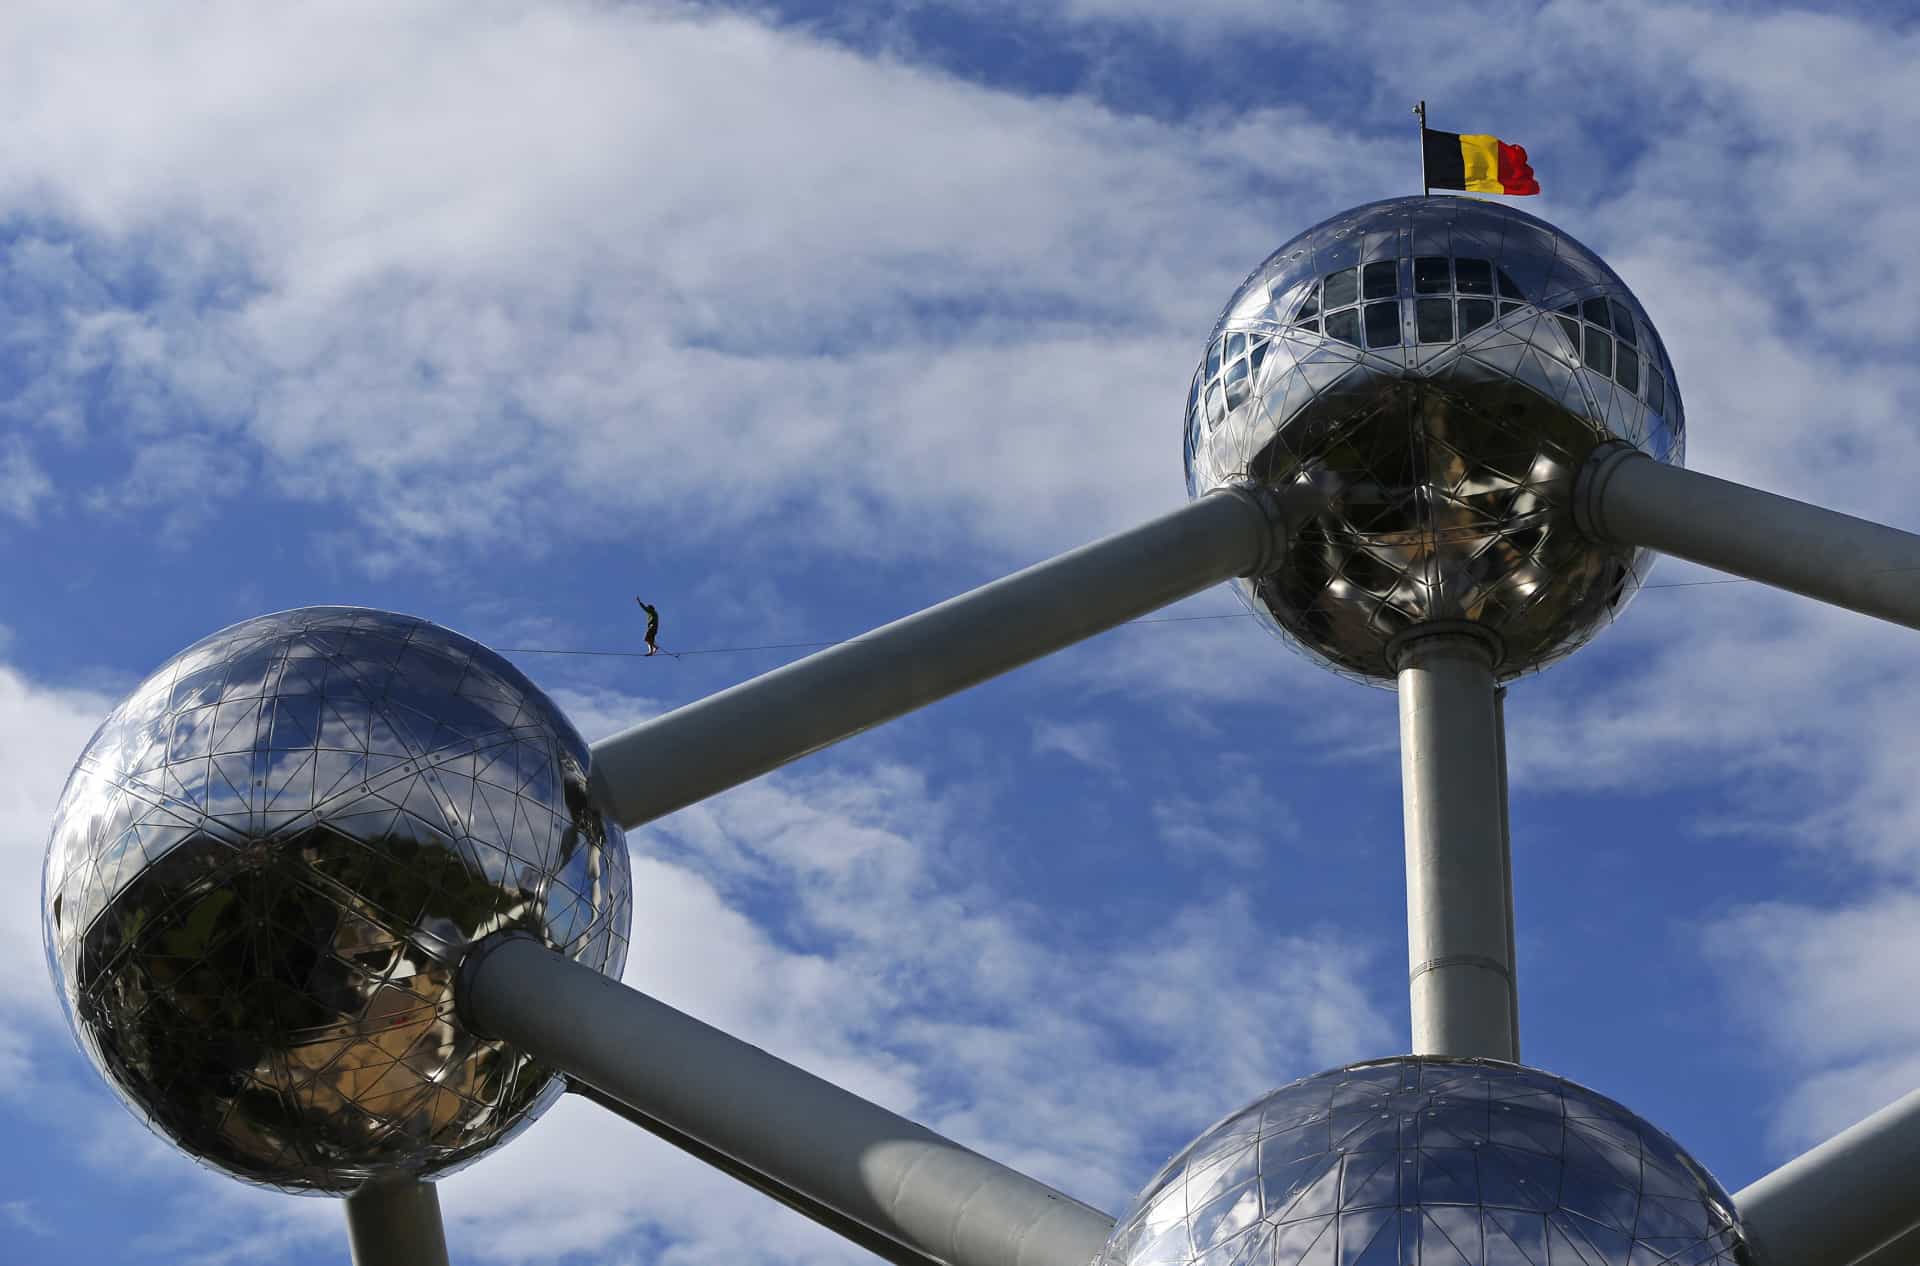 America has the Statue of Liberty, France has the Eiffel Tower, and Belgium has the Atomium! The iconic building located in Brussels consists of nine spheres that represent an iron crystal magnified 165 billion times. But don't let those high figures spook you—it only takes 23 seconds to get to the top with an elevator.